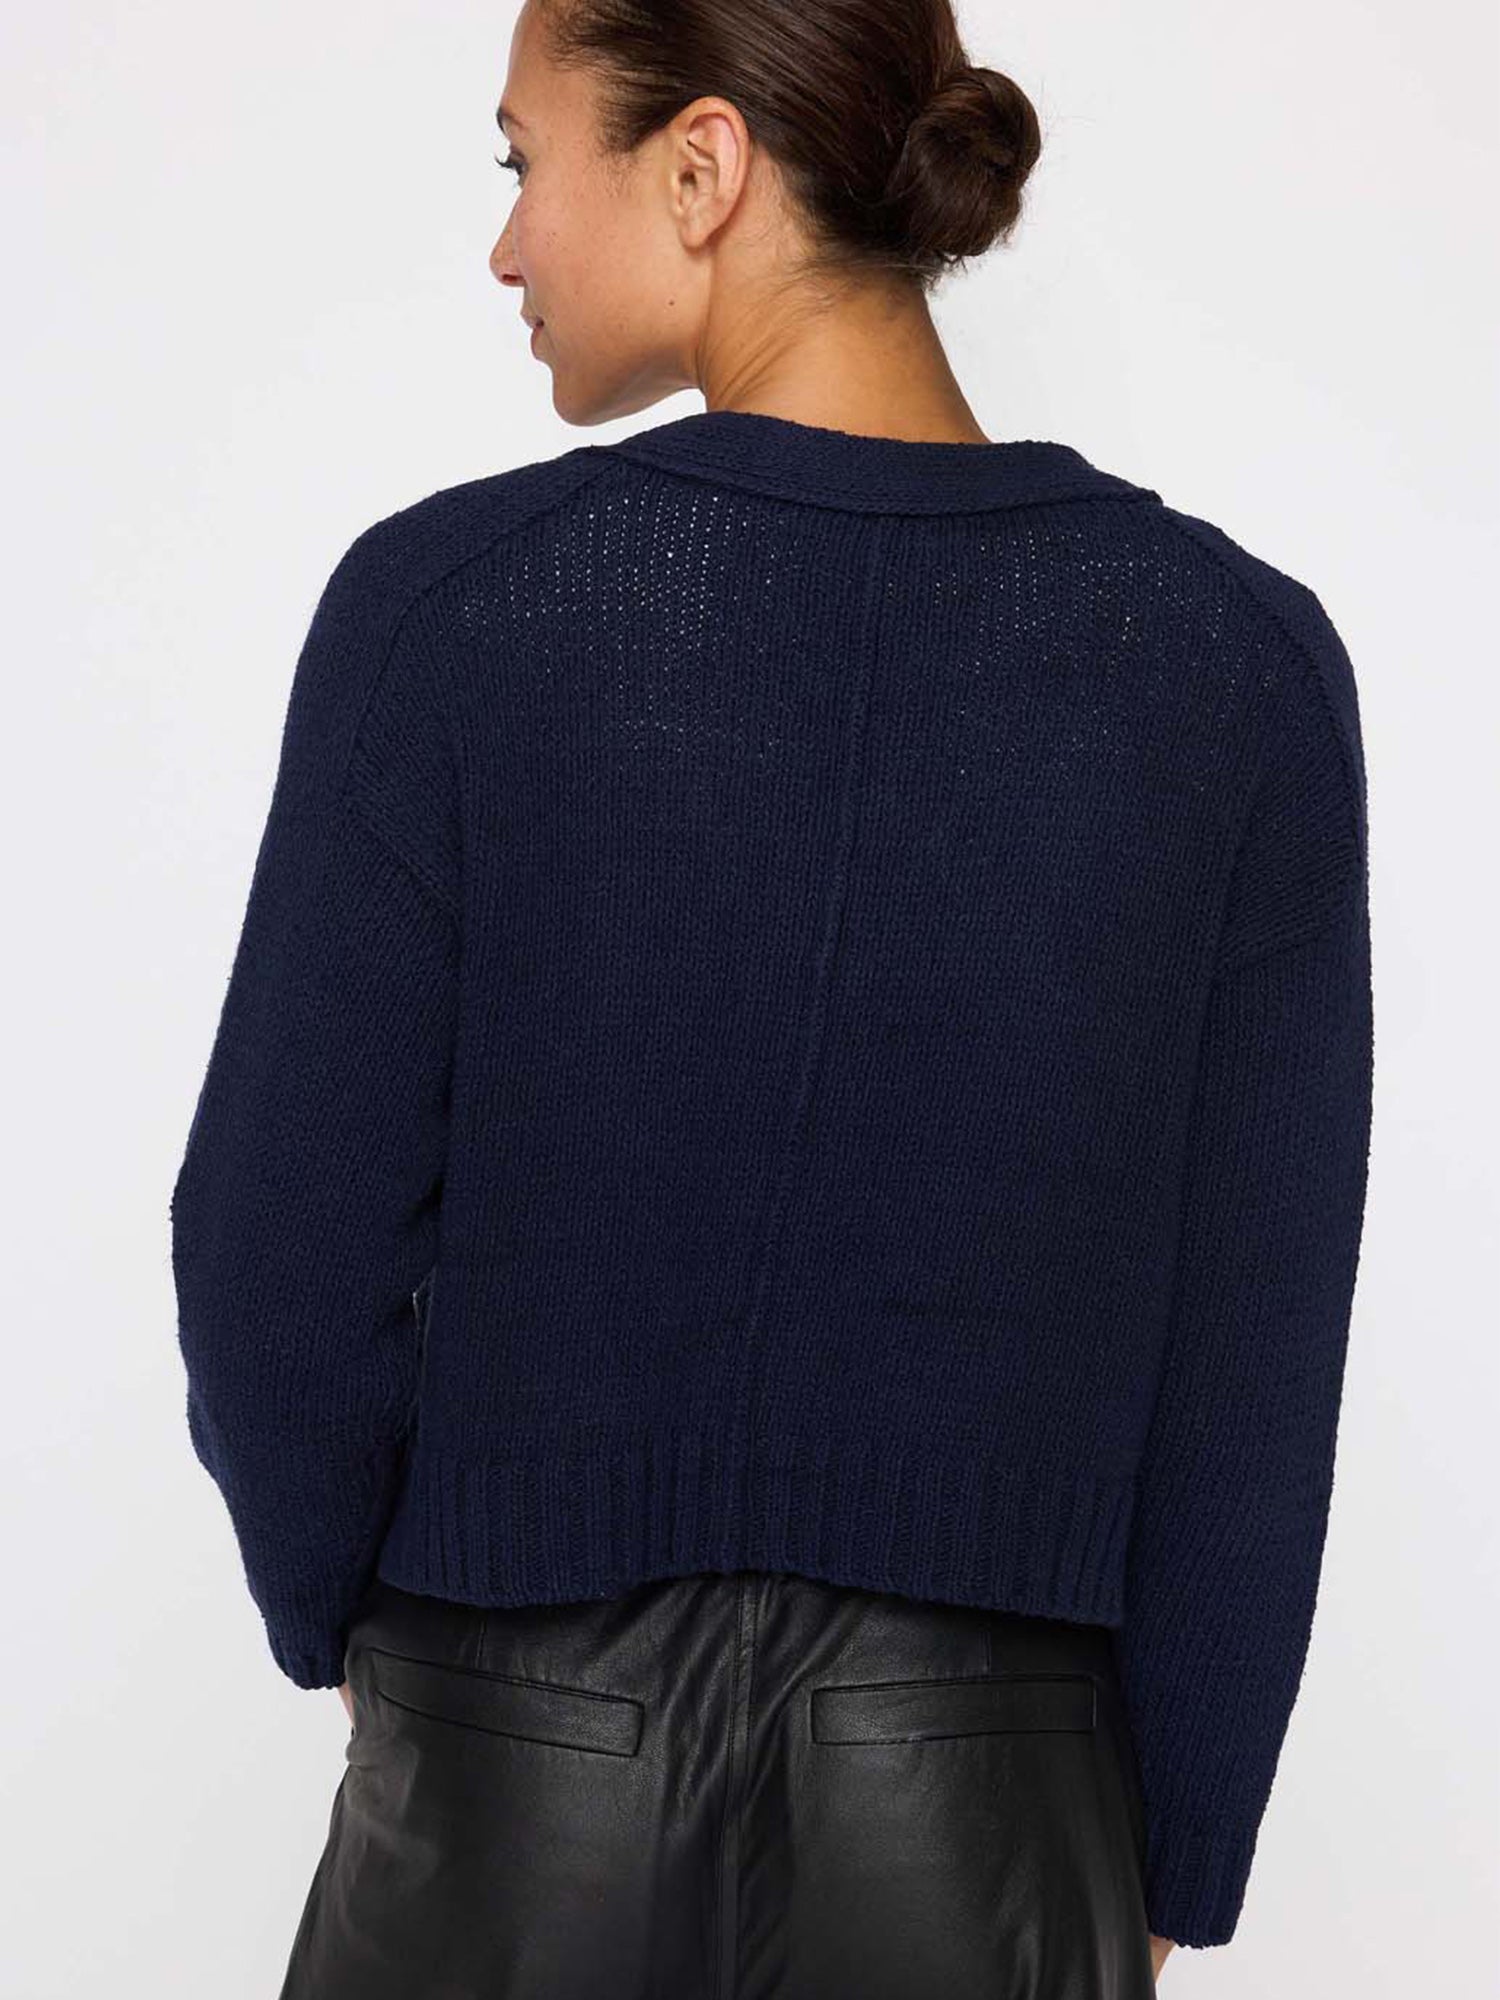 Cropped navy linen cotton cardigan sweater back view